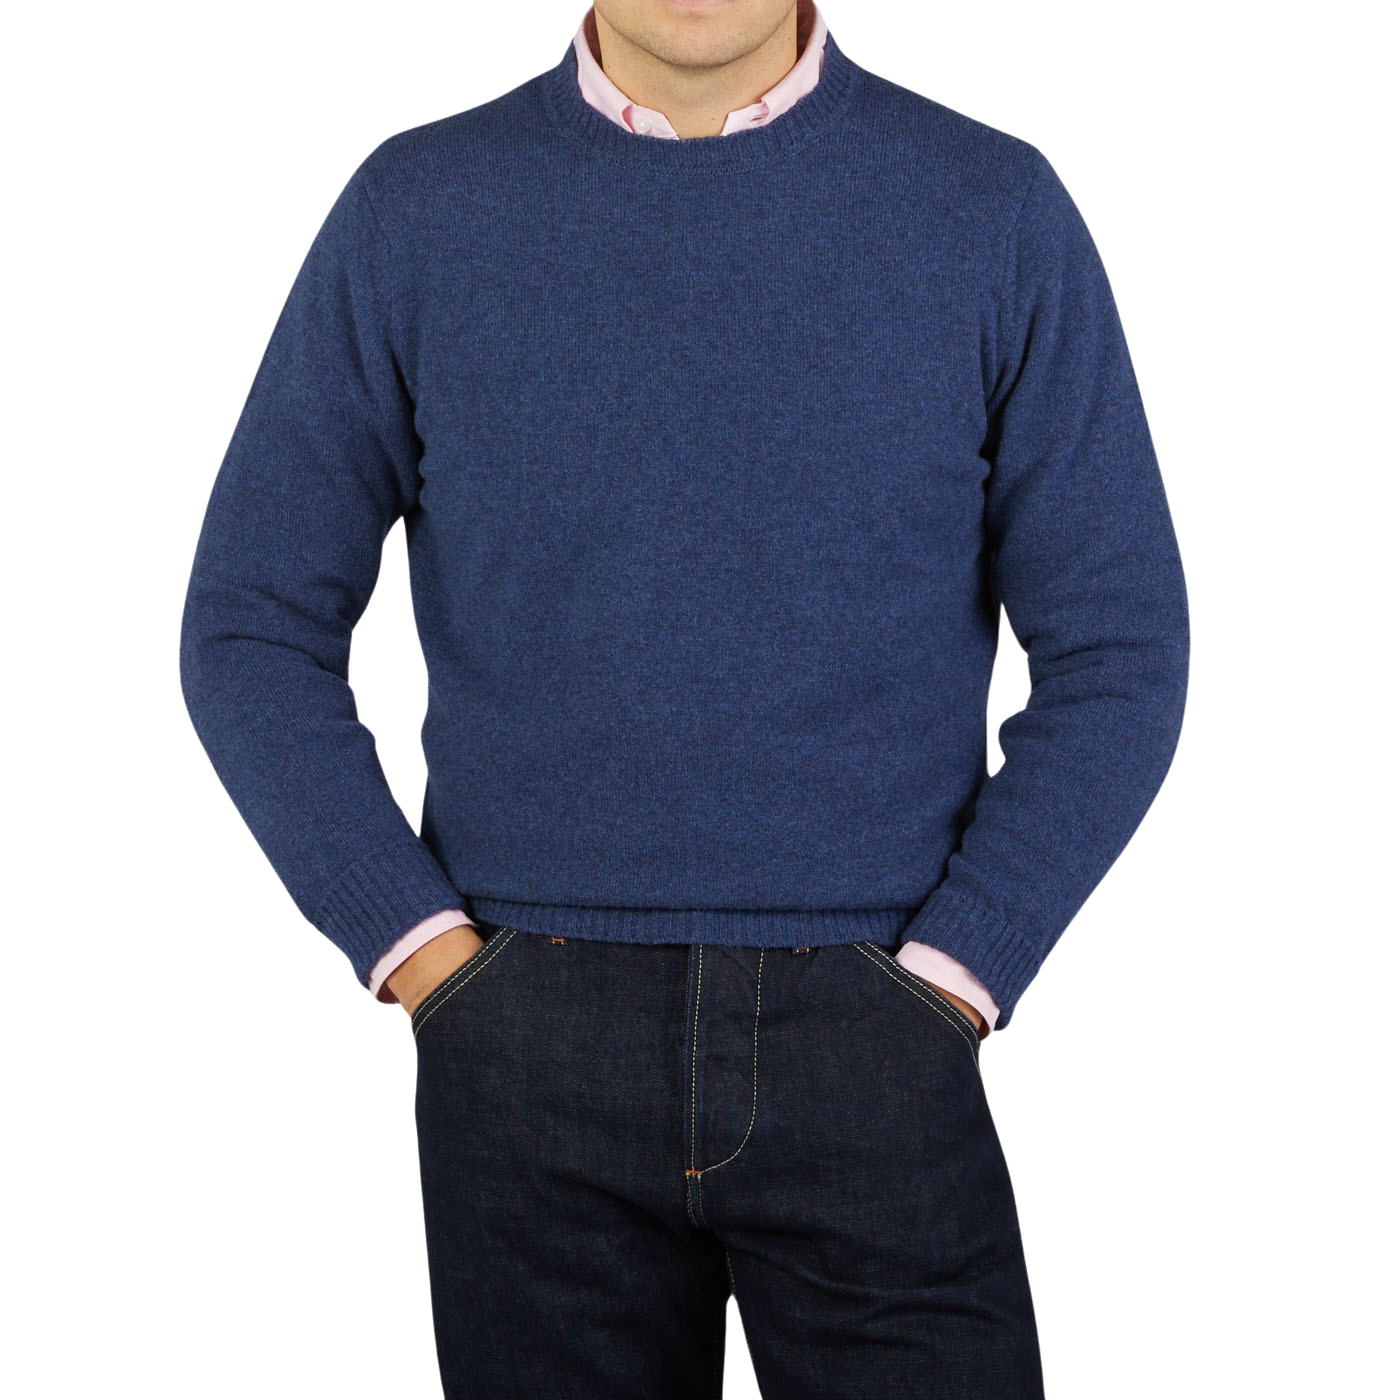 A man wearing a smart casual outfit consisting of a Rhapsody Blue Crew Neck Lambswool Sweater by William Lockie and jeans.